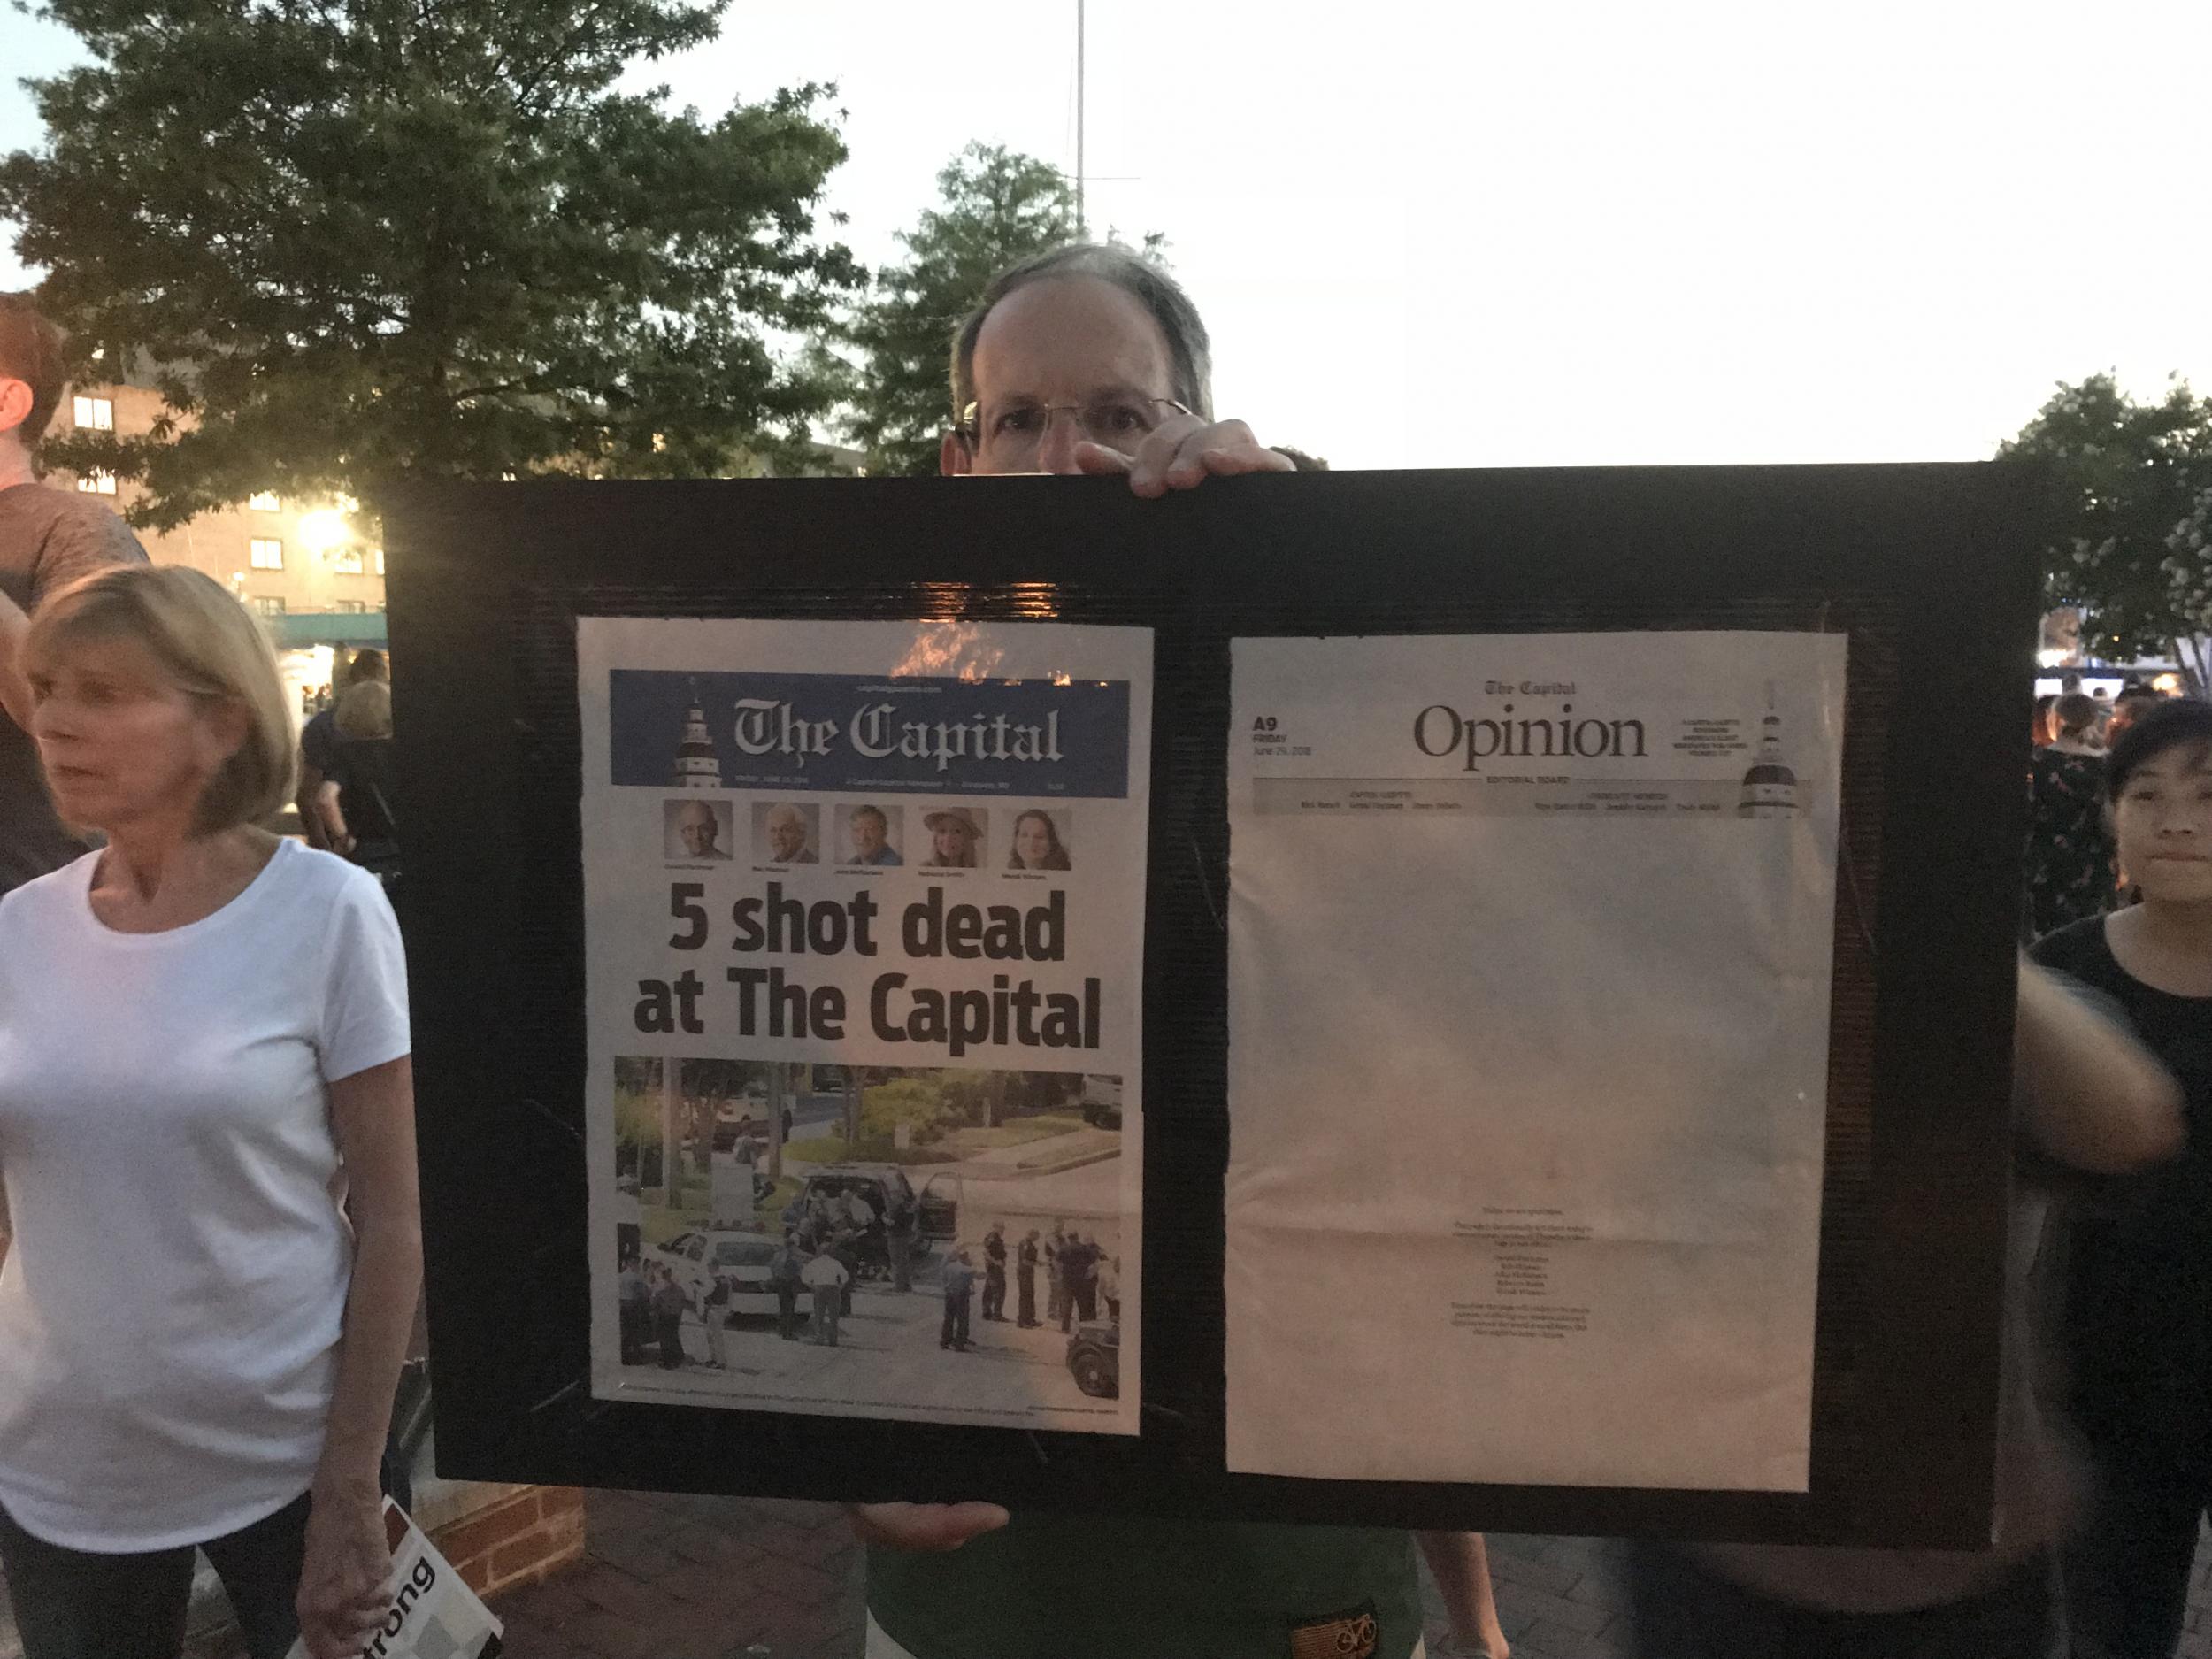 A lone gunman opened fire on the offices of Capital Gazette newspaper in Annapolis